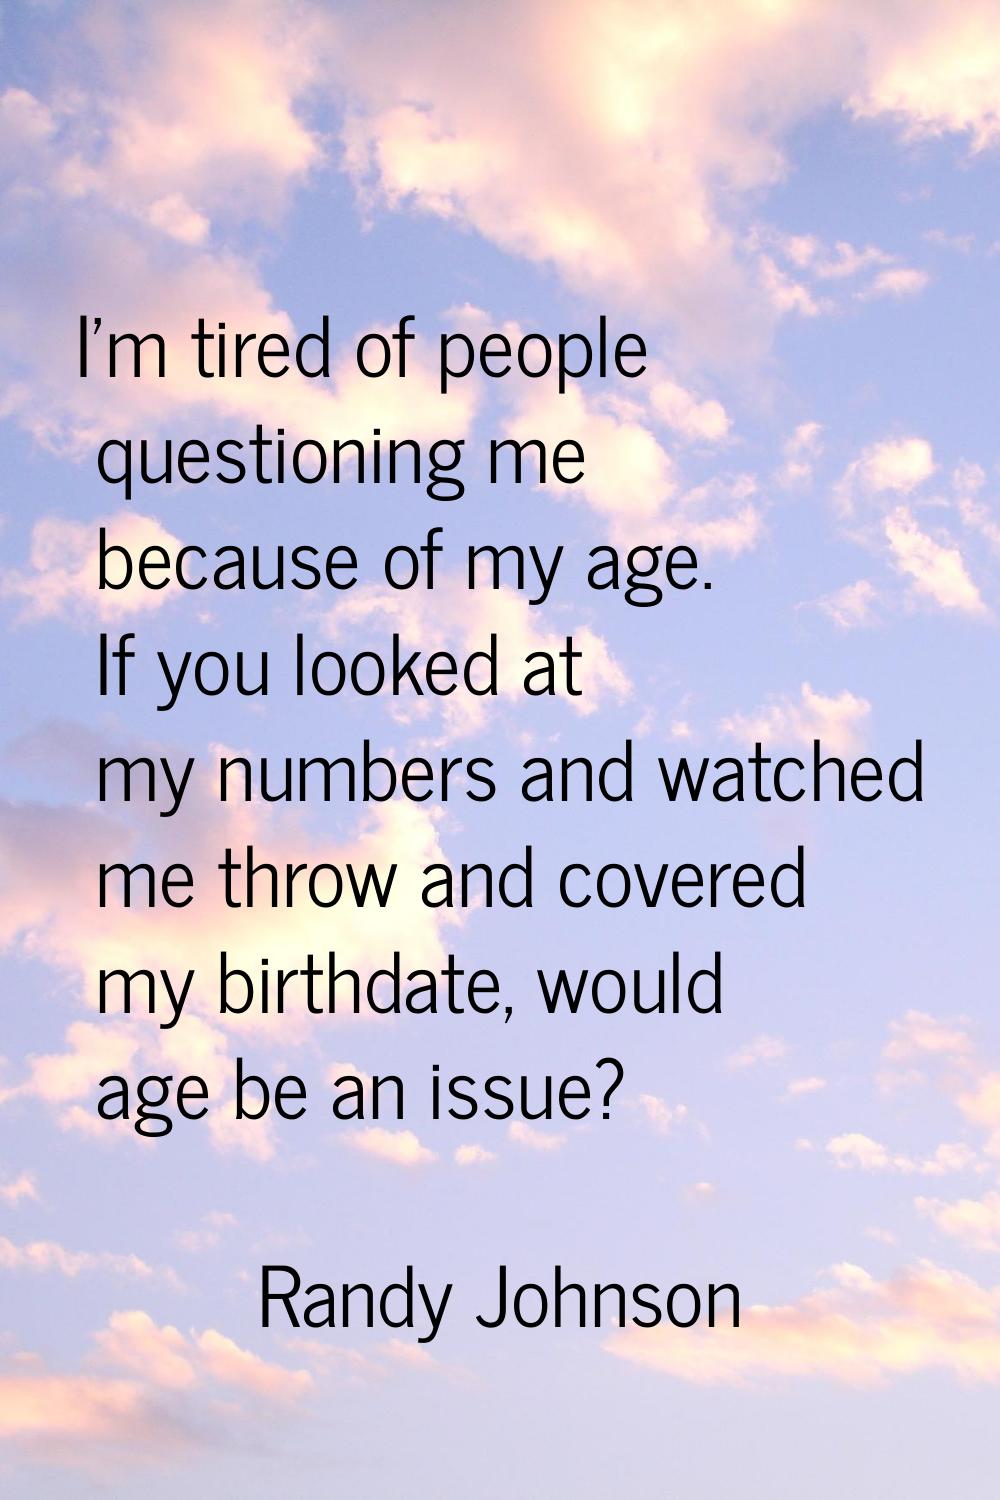 I'm tired of people questioning me because of my age. If you looked at my numbers and watched me th